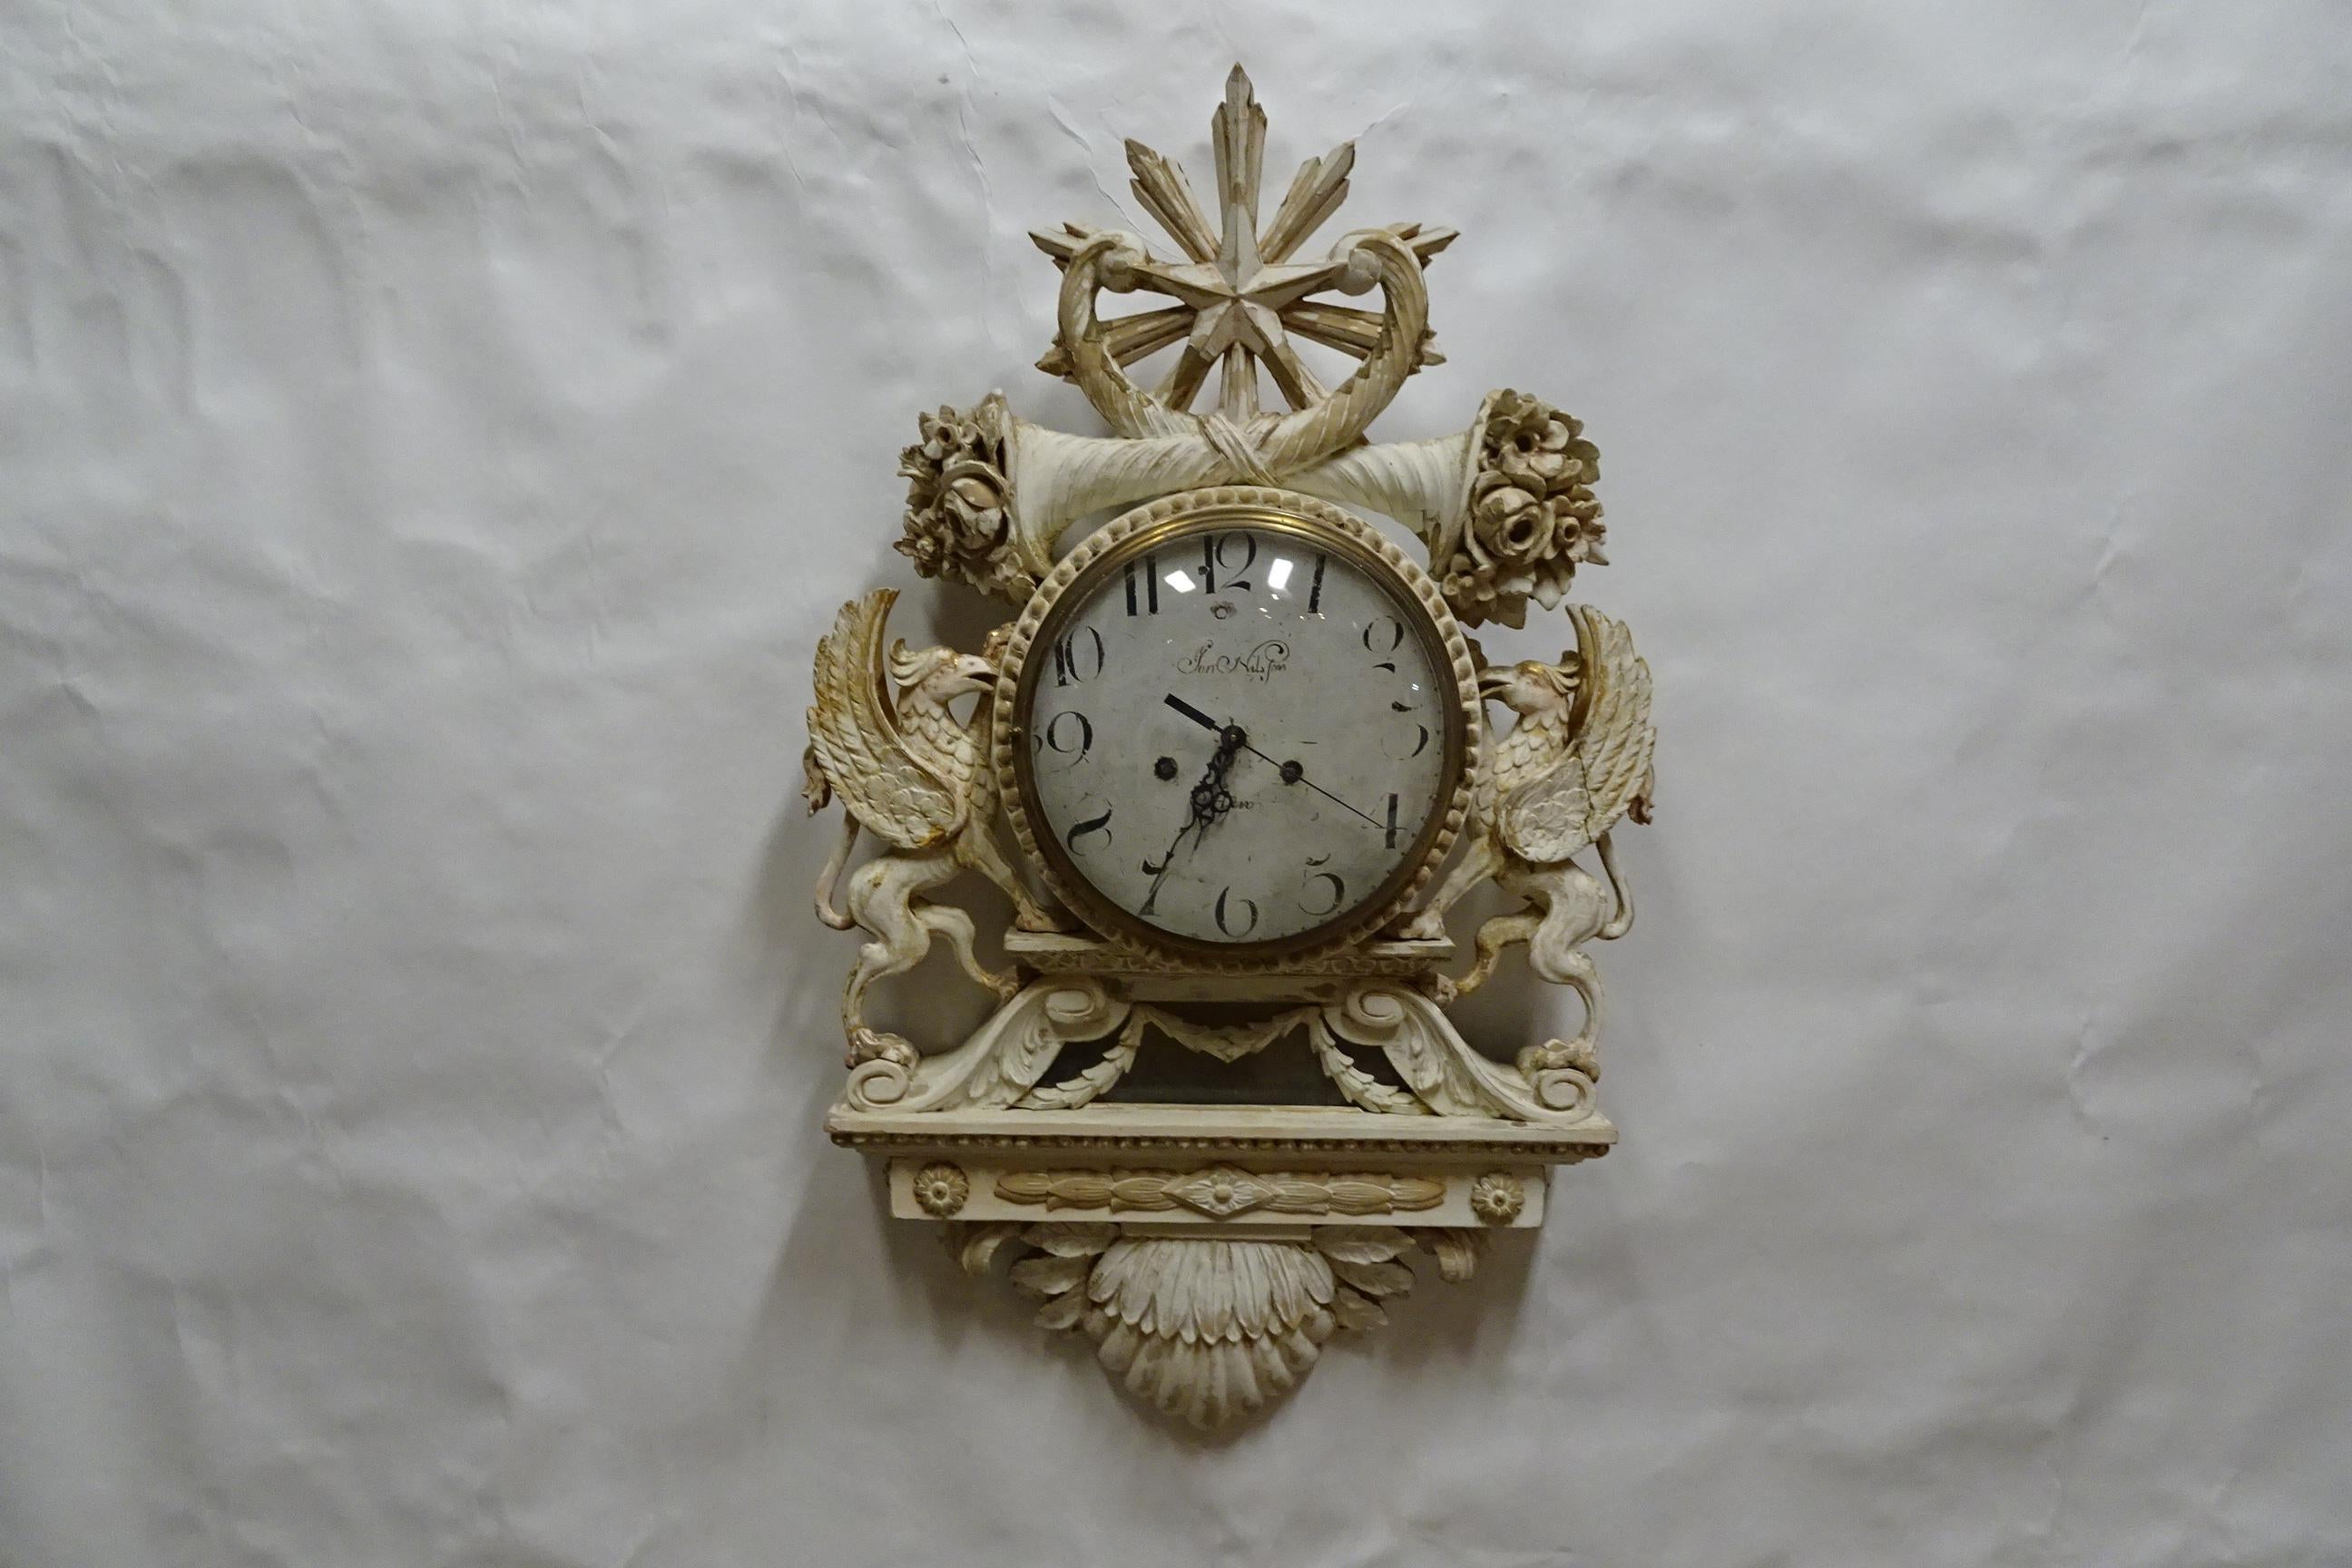 This is a 100% Original Finish Swedish Gustavian Style Wall Clock. it has had a Reproduction face and new battery works installed. you have a choice of chimes, volume nob and an Off switch.